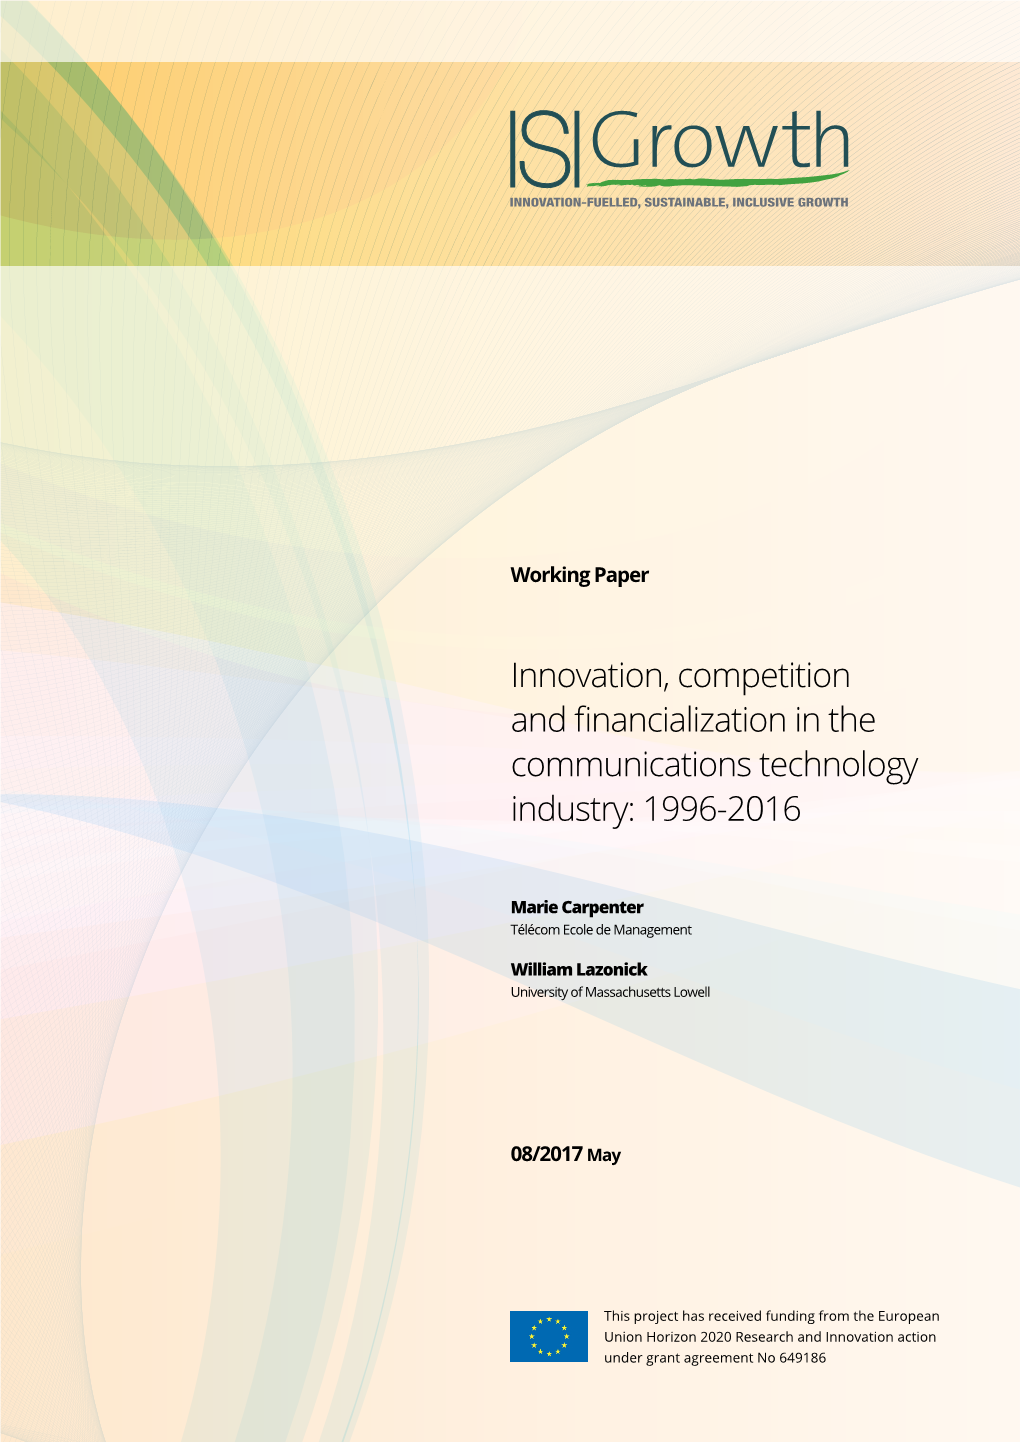 Innovation, Competition and Financialization in the Communications Technology Industry: 1996-2016